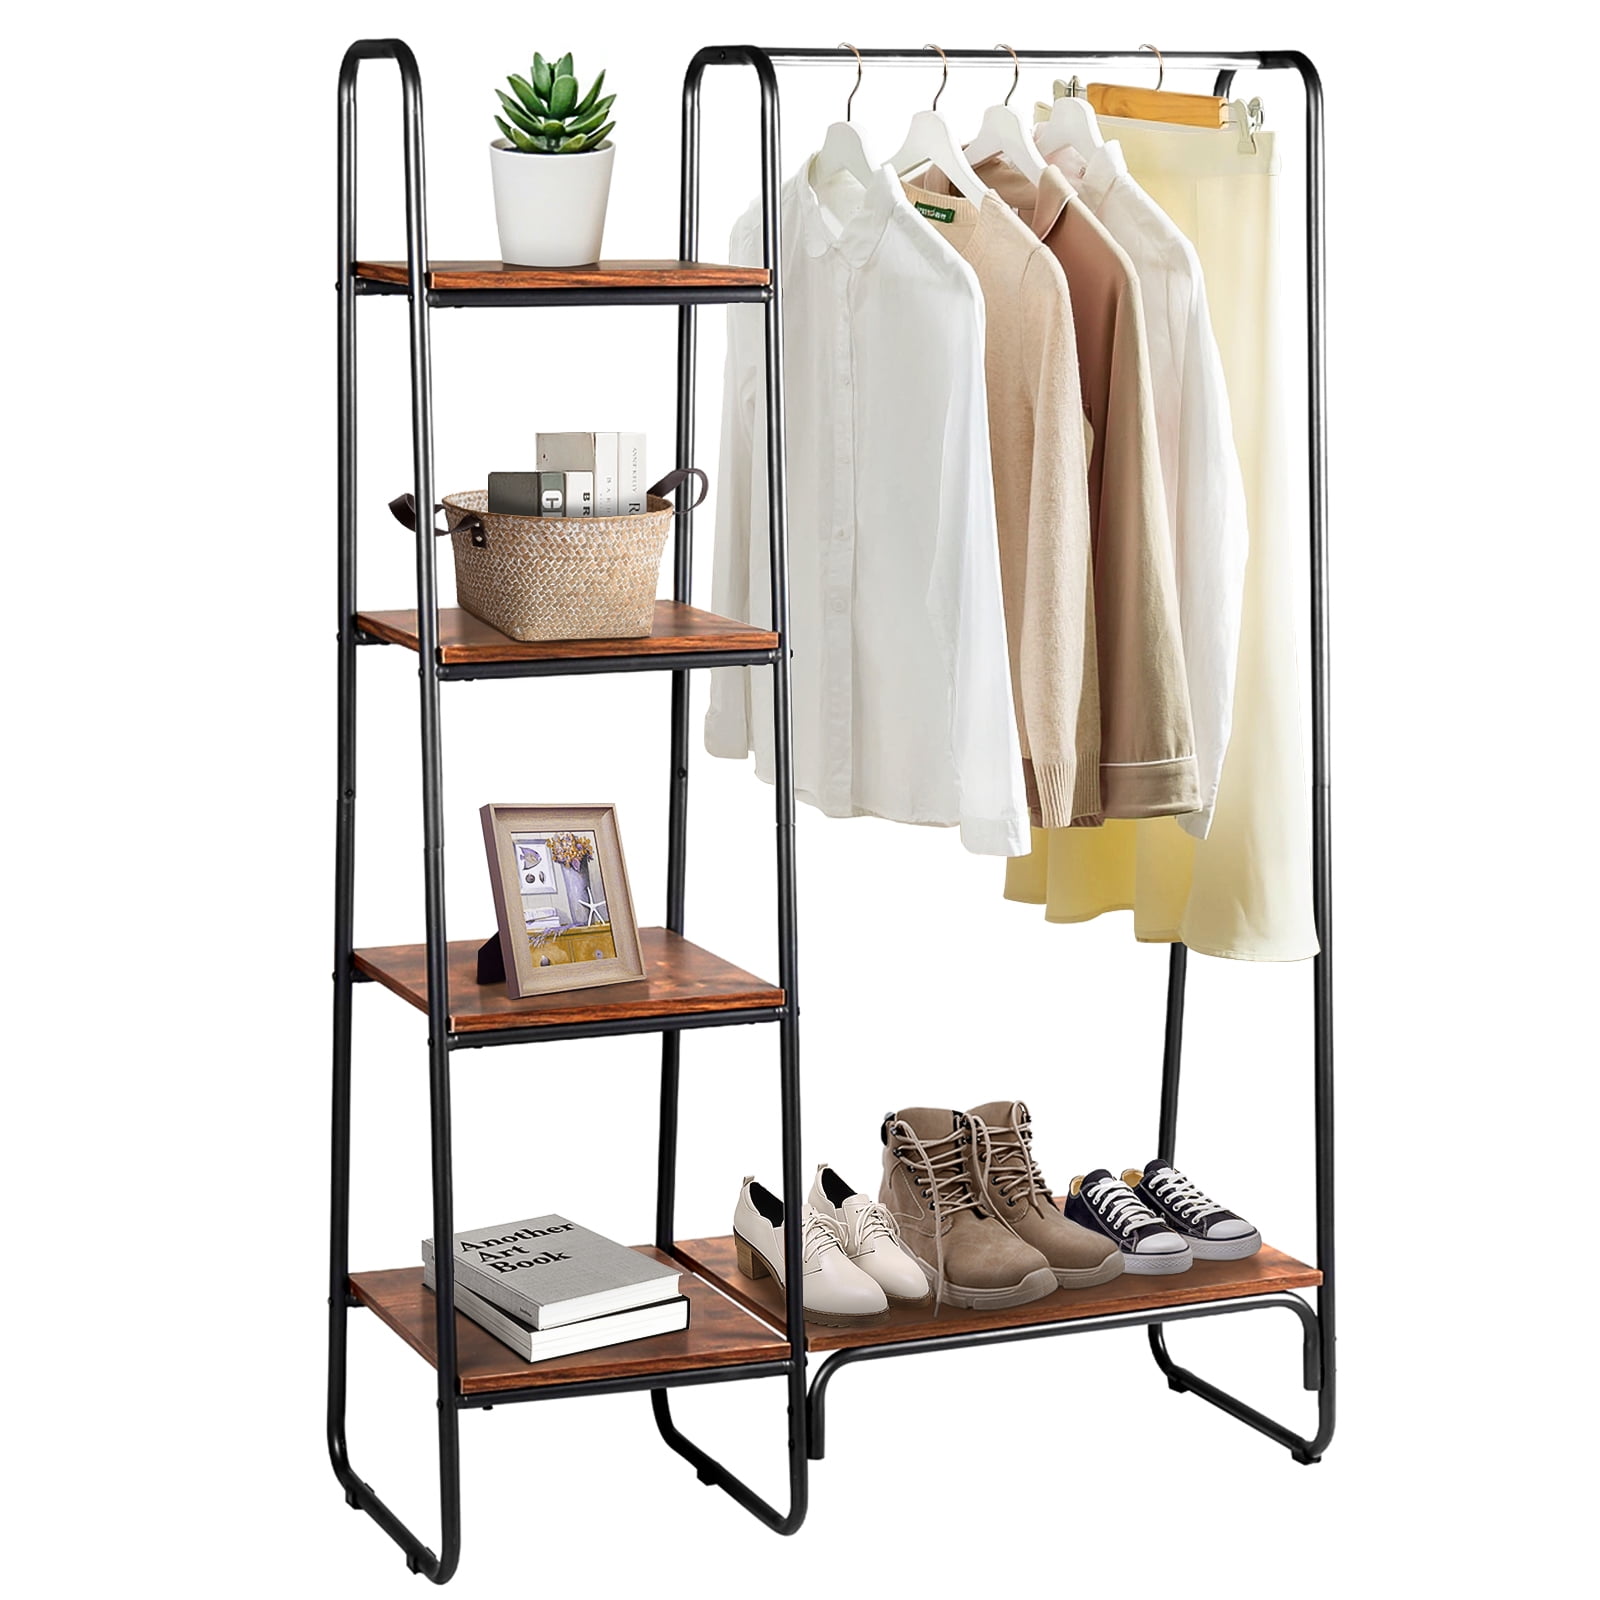 Industrial Corner Clothes Rail Clothes Hanger Wall Mounted Rail